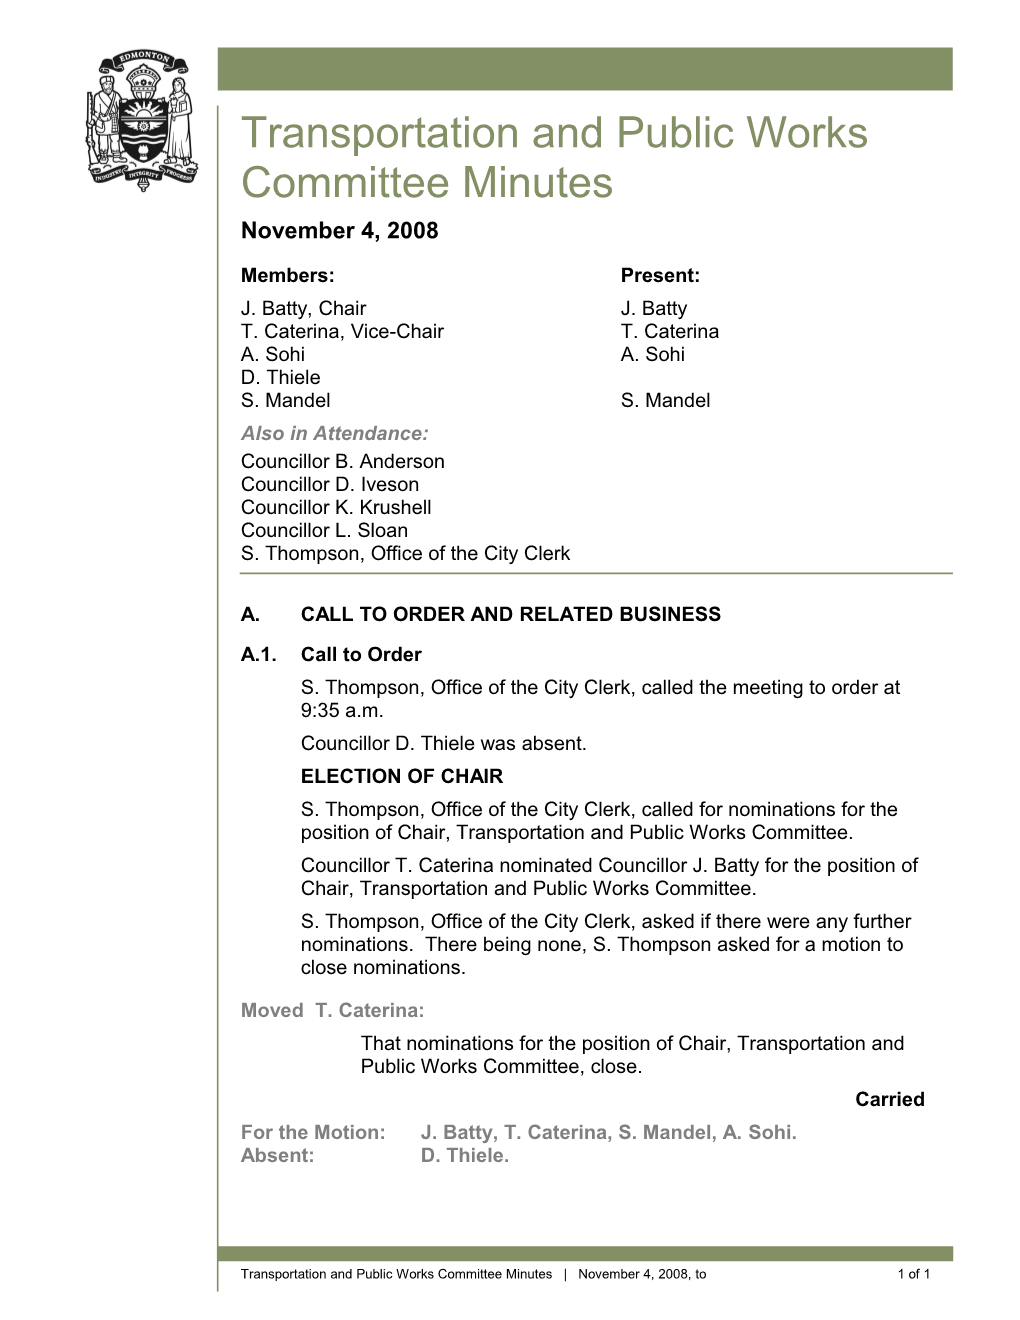 Minutes for Transportation and Public Works Committee November 4, 2008 Meeting